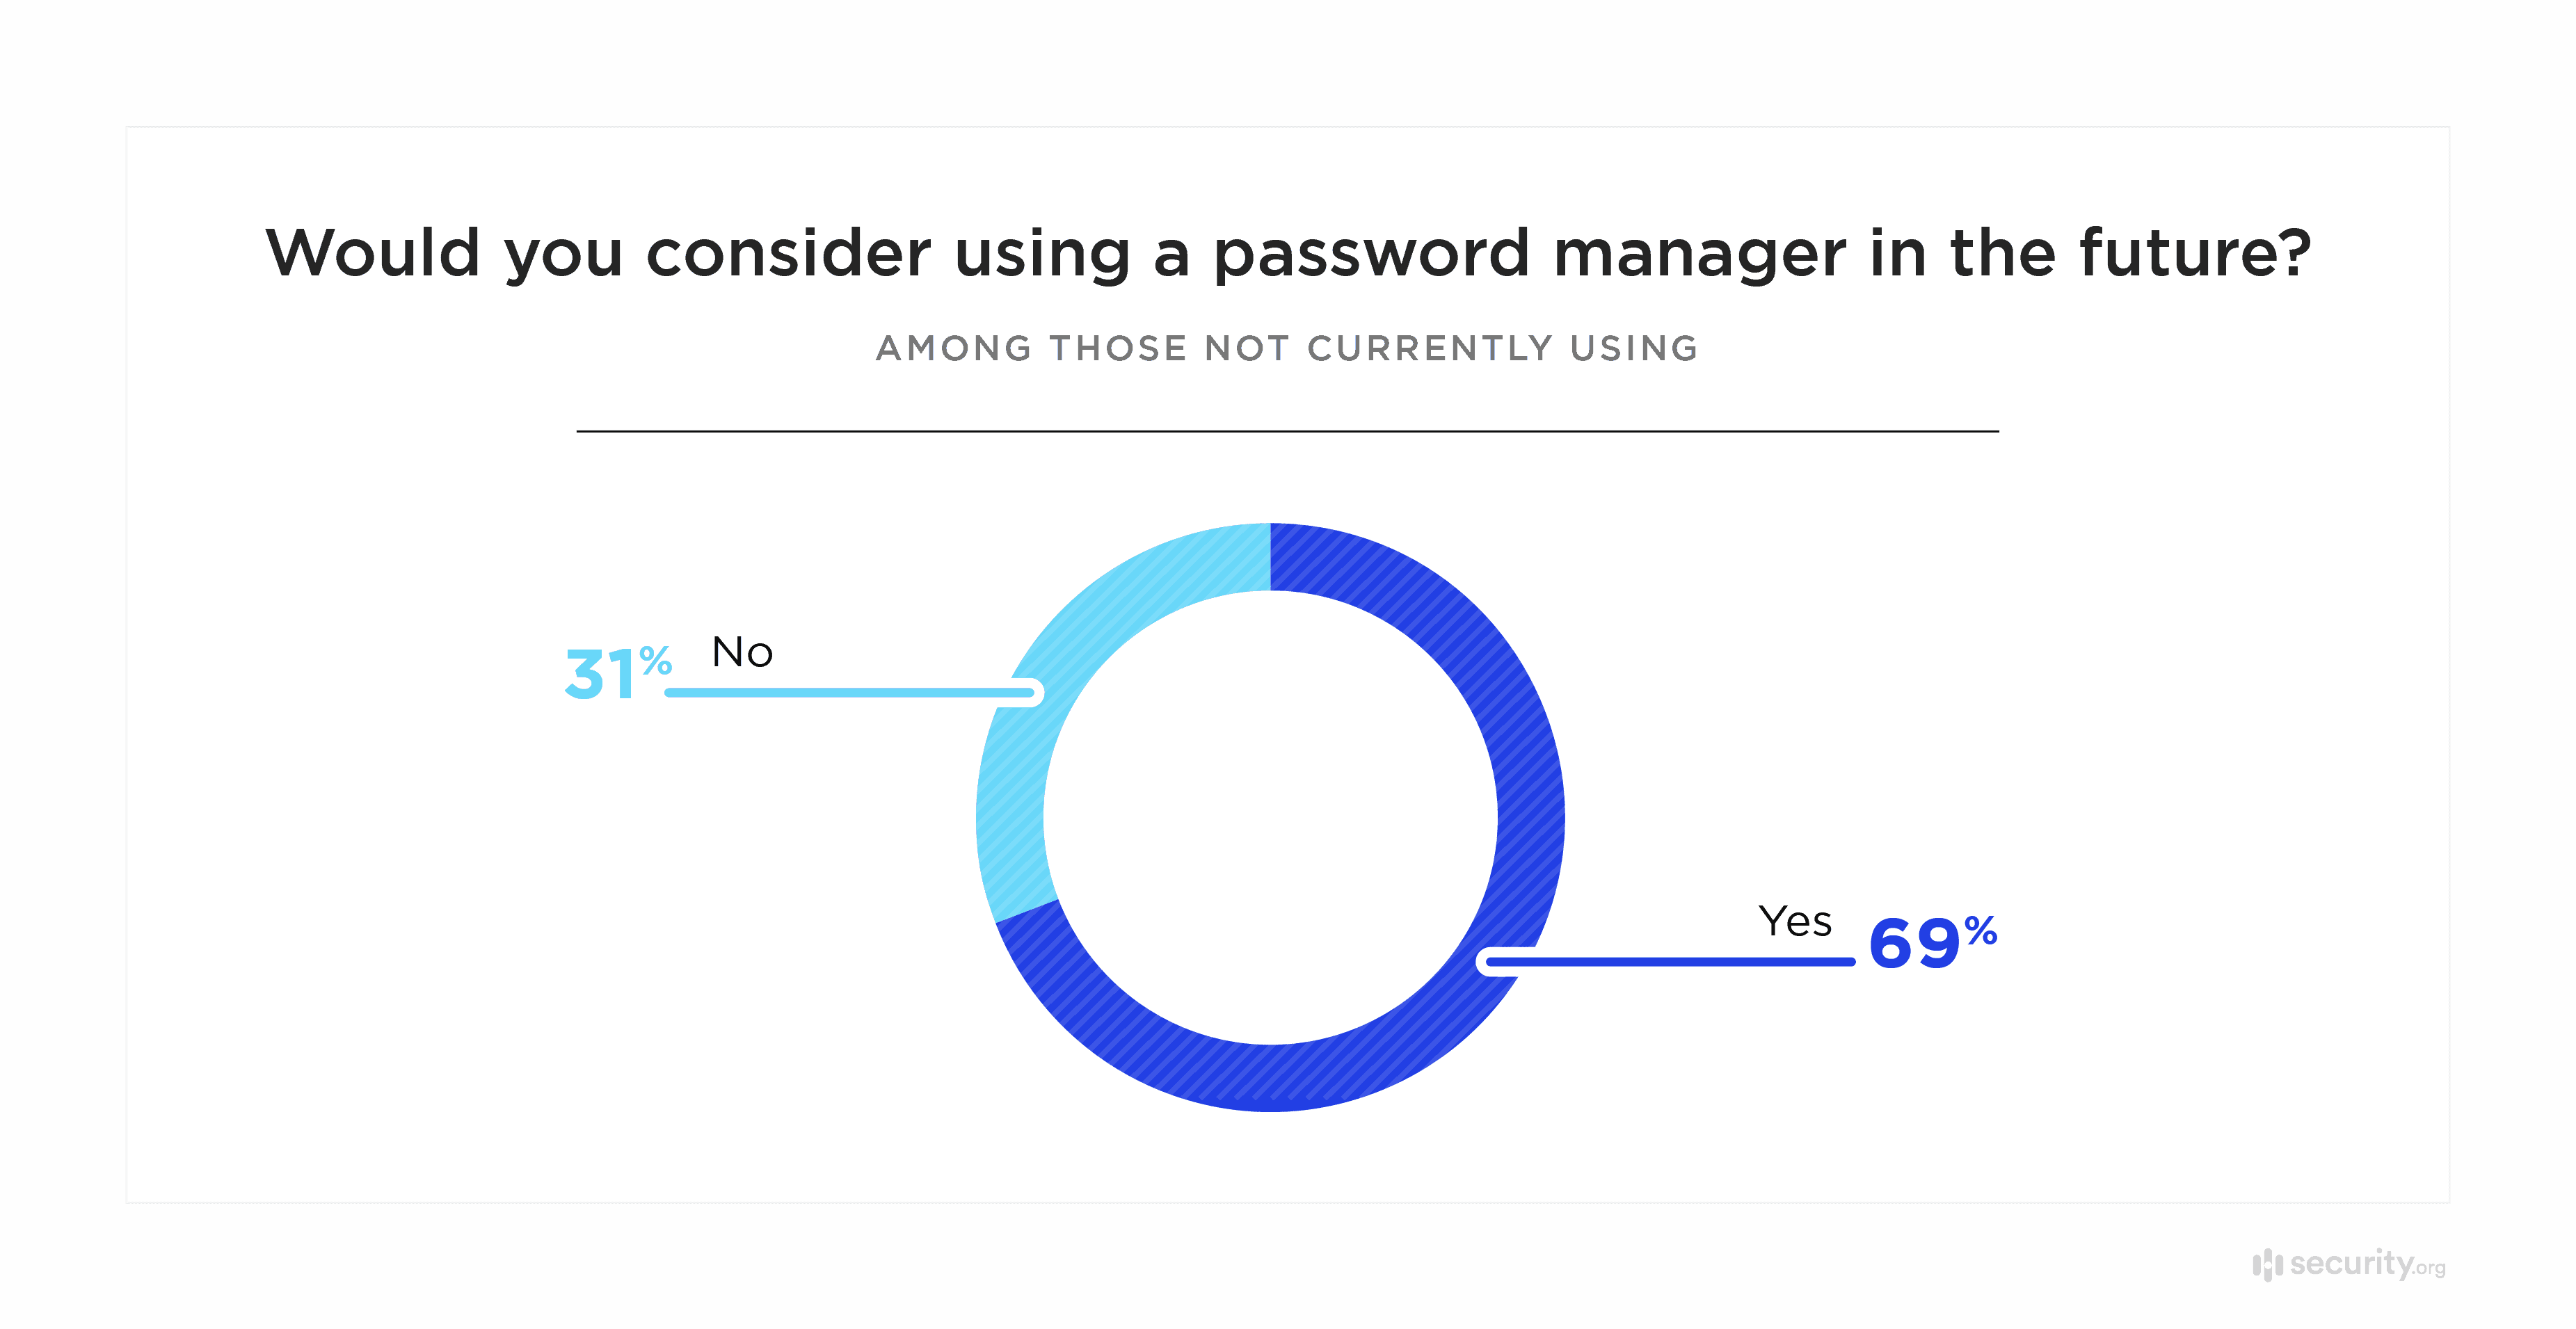 Would you consider using a password manager in the future